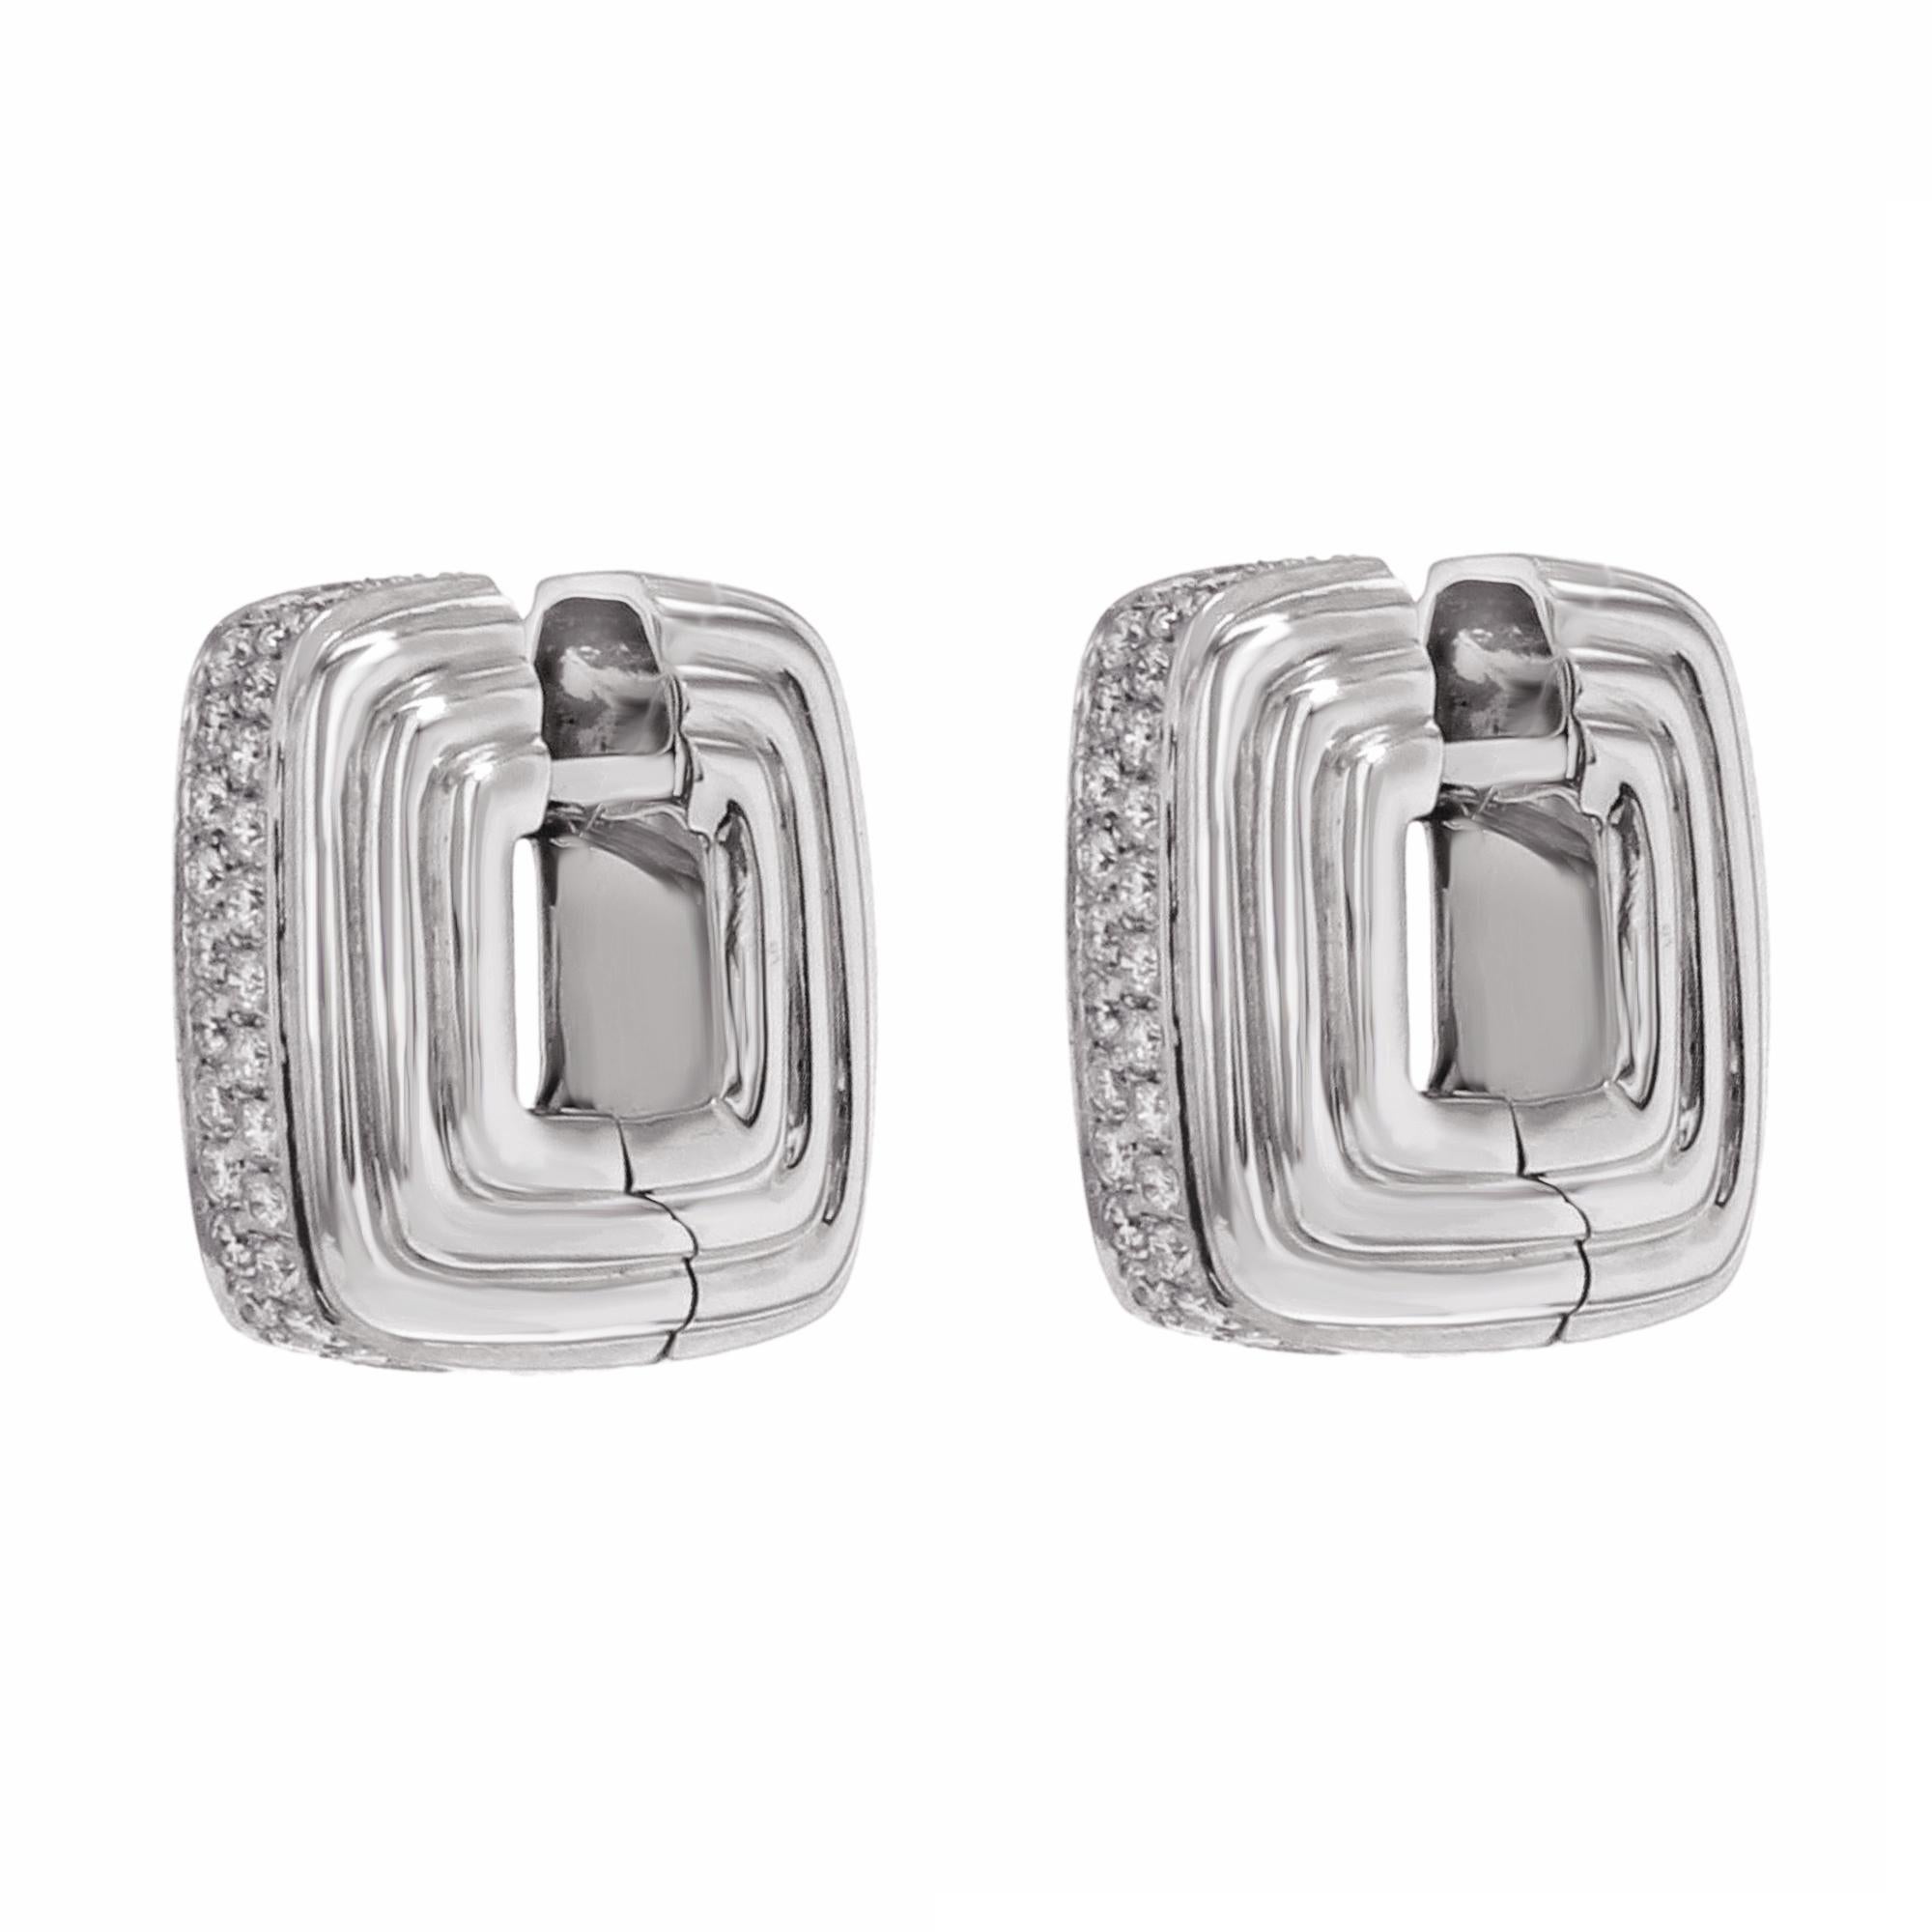 These earrings are new and made of 18K white gold and encrusted with 0.68 cttw diamonds. Length of the ring is 18mm, total weight 15.5 g. These earrings come in a nice presentation box with appraisal of authenticity.

Note: we would advise that